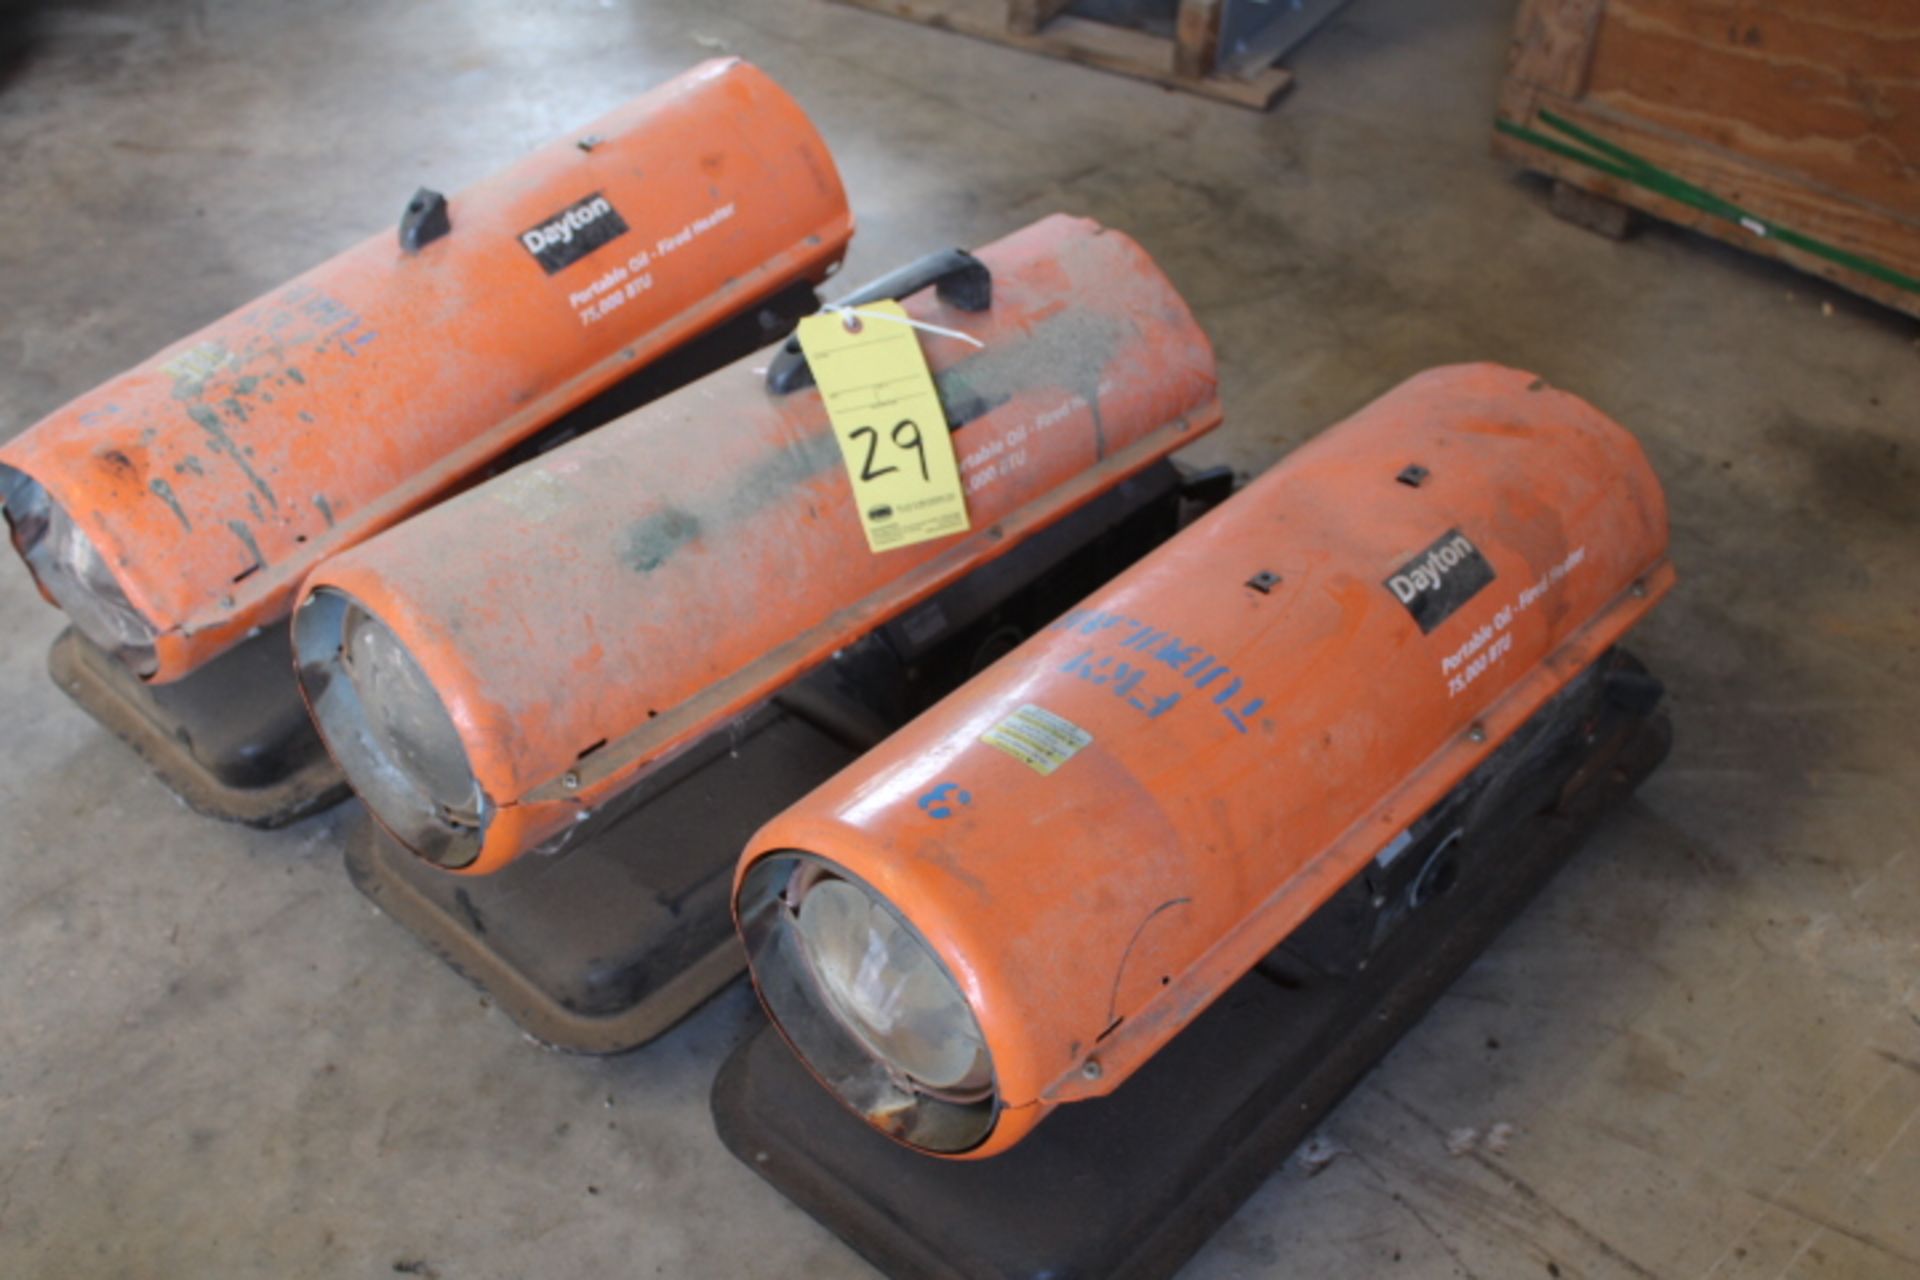 LOT OF PORTABLE HEATERS (4), DAYTON, 75,000 BTU, oil fired